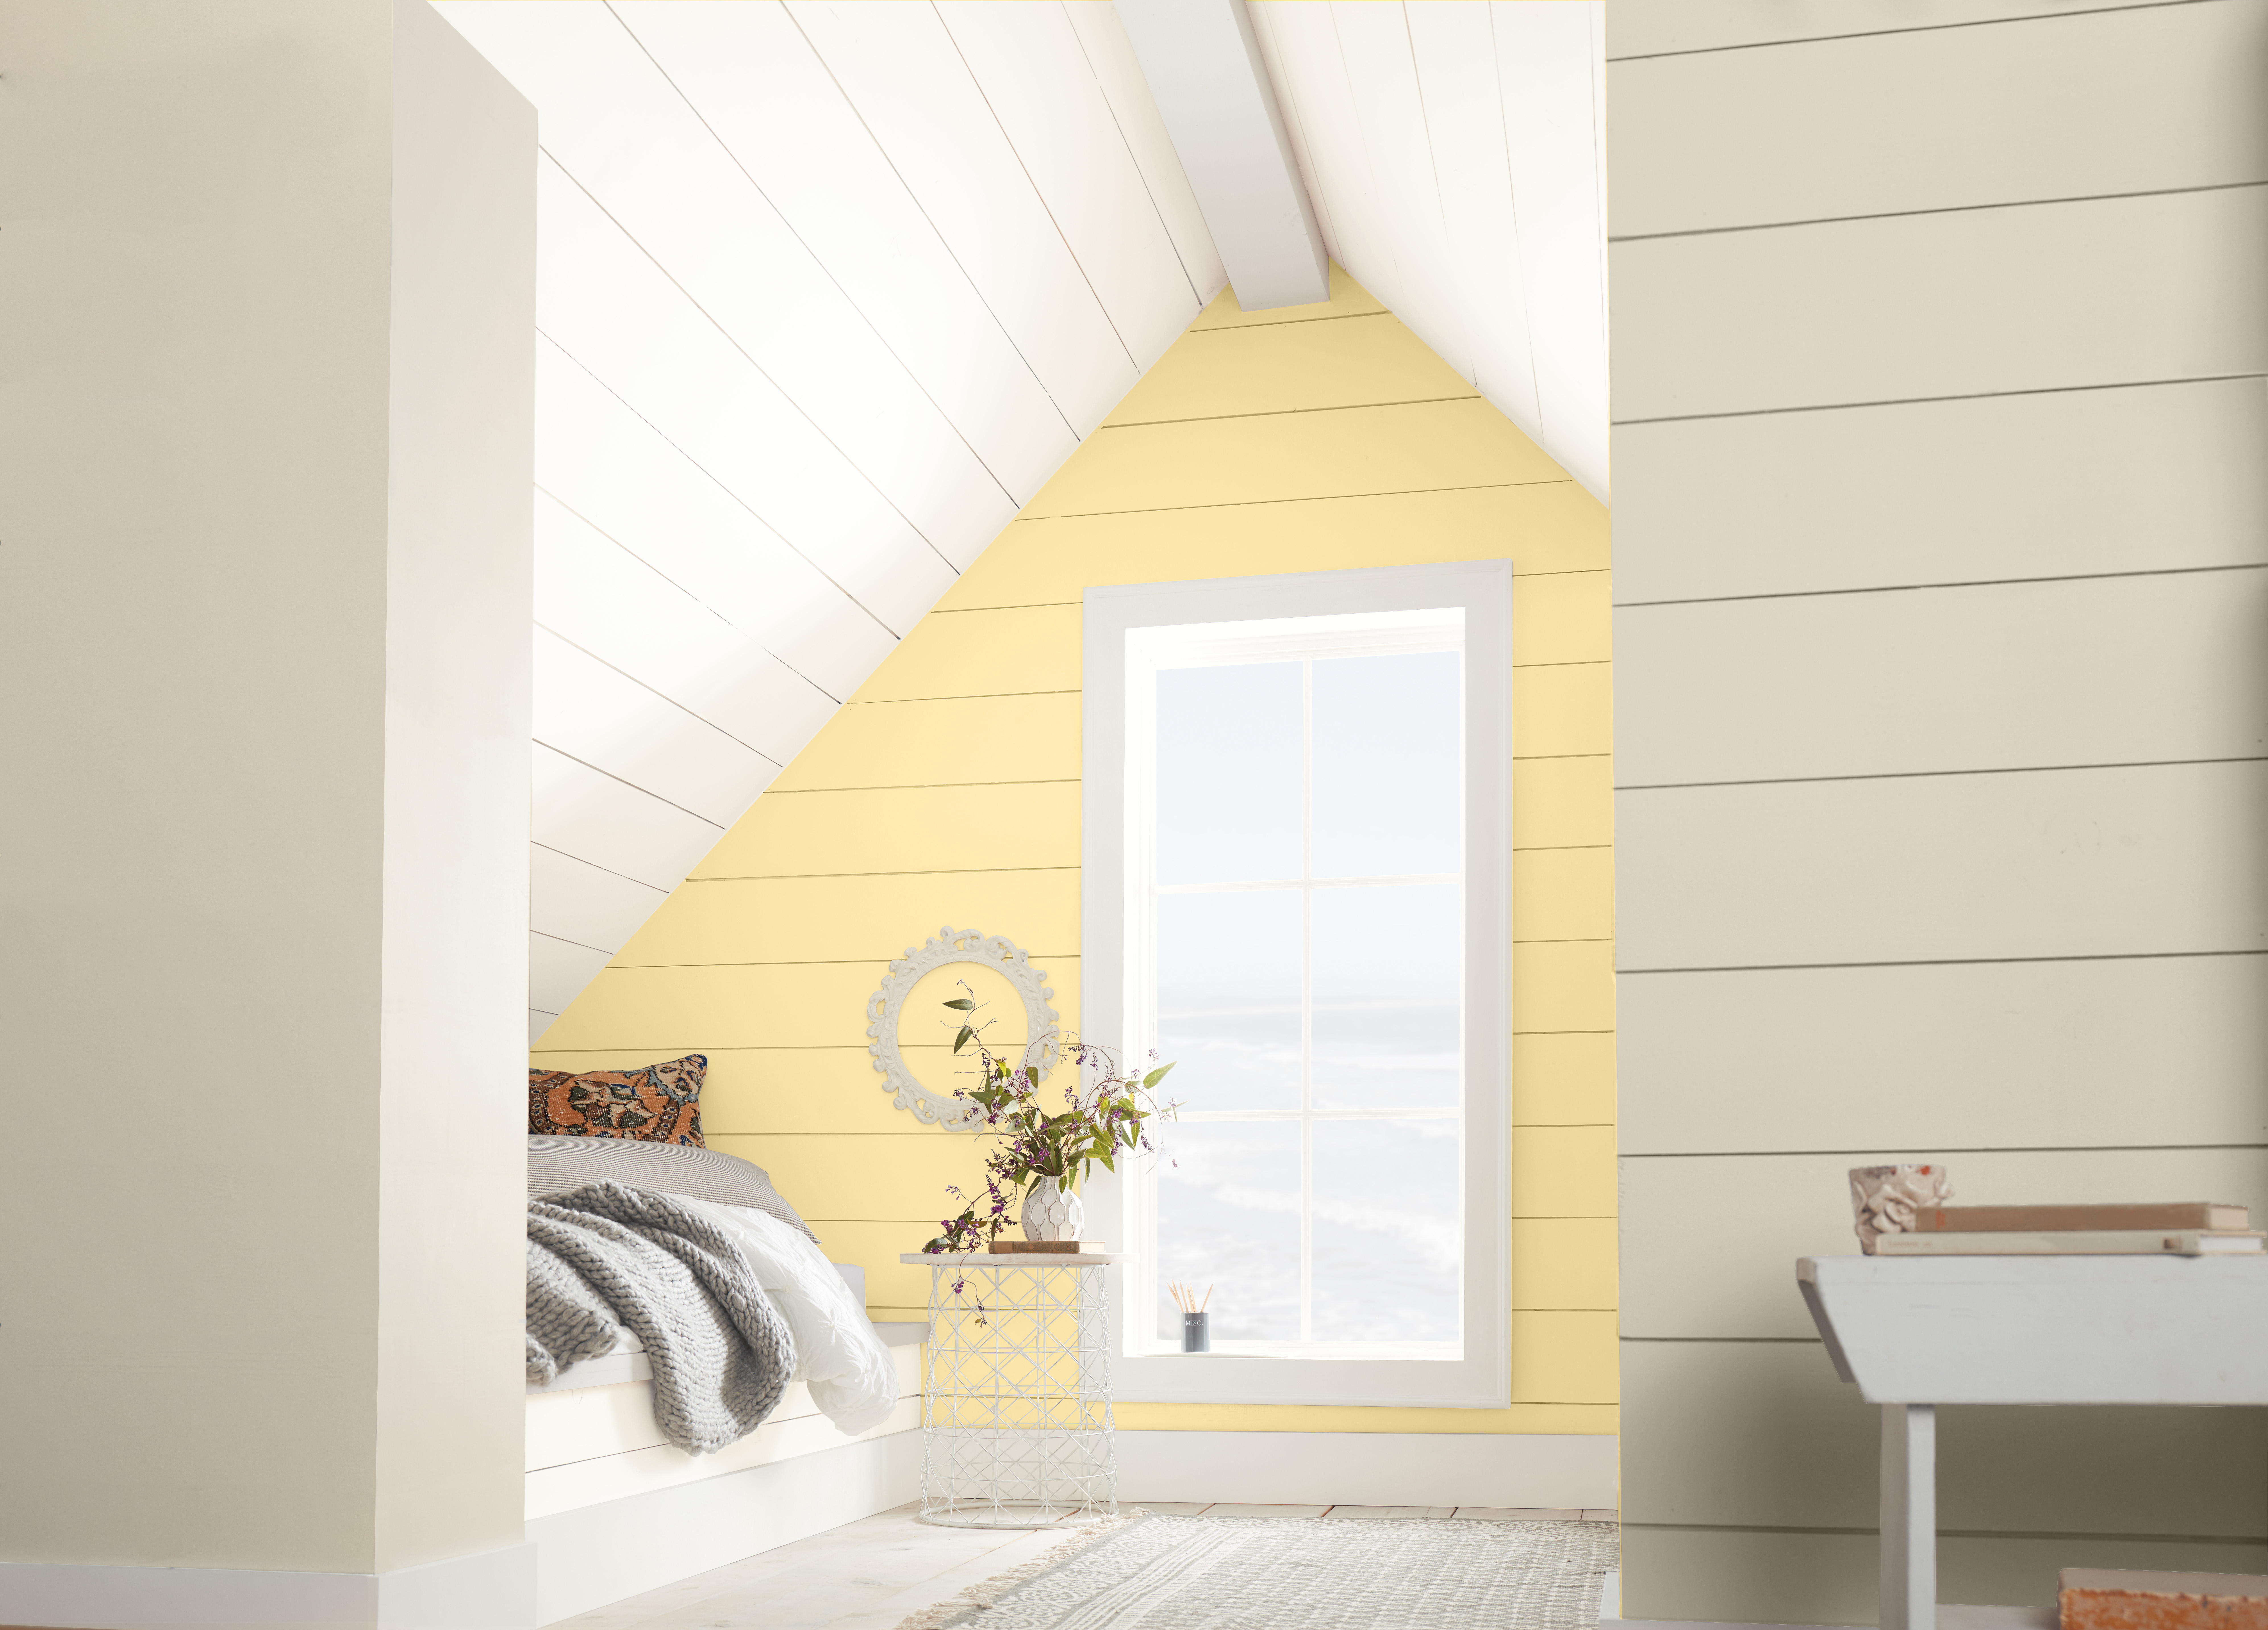 A white bedroom with an accent wall painted in a bright pastel yellow colour